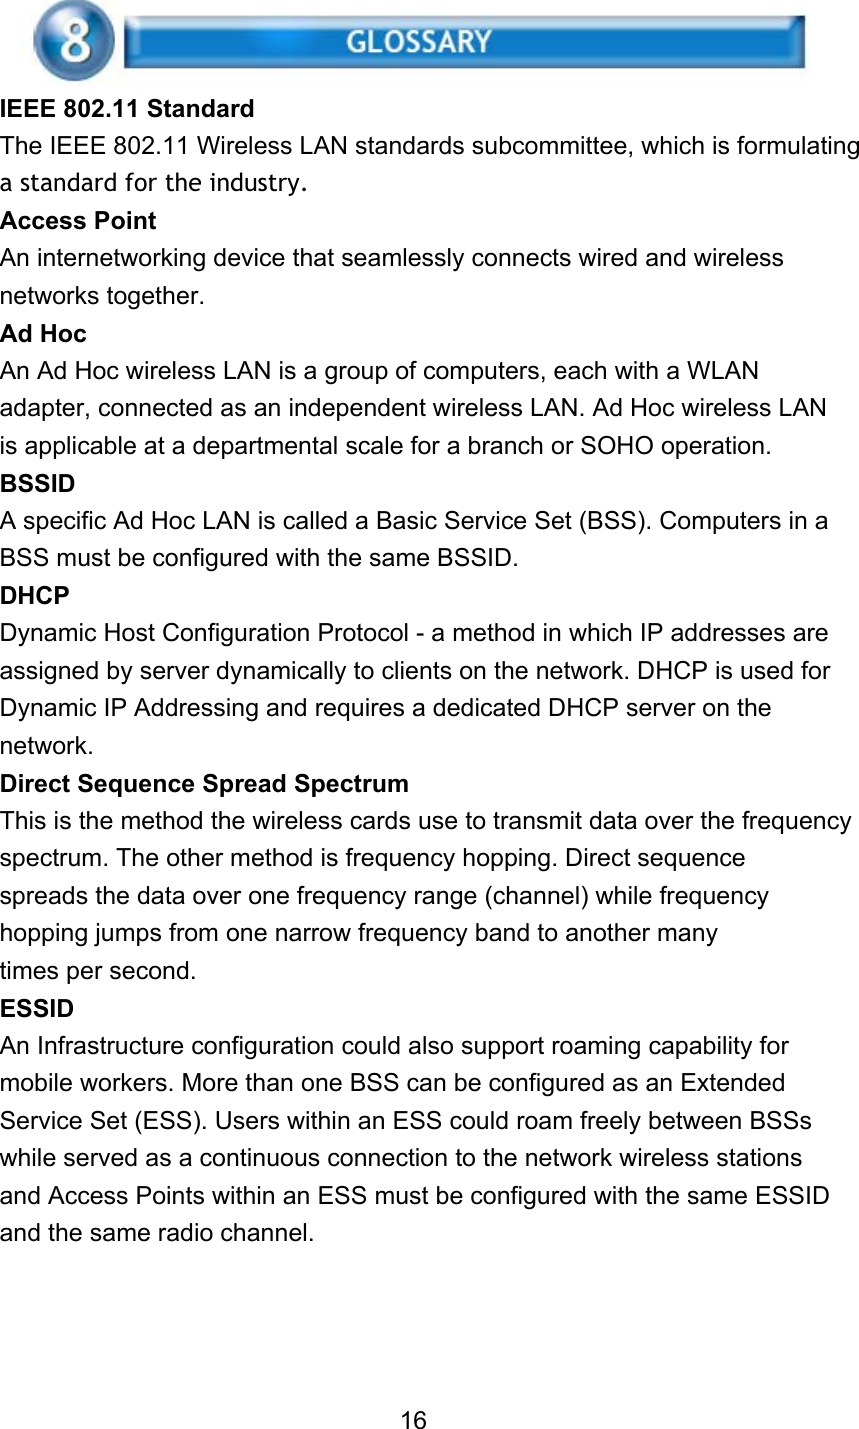 IEEE 802.11 Standard The IEEE 802.11 Wireless LAN standards subcommittee, which is formulating a standard for the industry. Access Point An internetworking device that seamlessly connects wired and wireless networks together. Ad Hoc An Ad Hoc wireless LAN is a group of computers, each with a WLAN adapter, connected as an independent wireless LAN. Ad Hoc wireless LAN is applicable at a departmental scale for a branch or SOHO operation. BSSID A specific Ad Hoc LAN is called a Basic Service Set (BSS). Computers in a BSS must be configured with the same BSSID. DHCP Dynamic Host Configuration Protocol - a method in which IP addresses are assigned by server dynamically to clients on the network. DHCP is used for Dynamic IP Addressing and requires a dedicated DHCP server on the network. Direct Sequence Spread Spectrum This is the method the wireless cards use to transmit data over the frequency spectrum. The other method is frequency hopping. Direct sequence spreads the data over one frequency range (channel) while frequency hopping jumps from one narrow frequency band to another many times per second. ESSID An Infrastructure configuration could also support roaming capability for mobile workers. More than one BSS can be configured as an Extended Service Set (ESS). Users within an ESS could roam freely between BSSs while served as a continuous connection to the network wireless stations and Access Points within an ESS must be configured with the same ESSID and the same radio channel.     16 